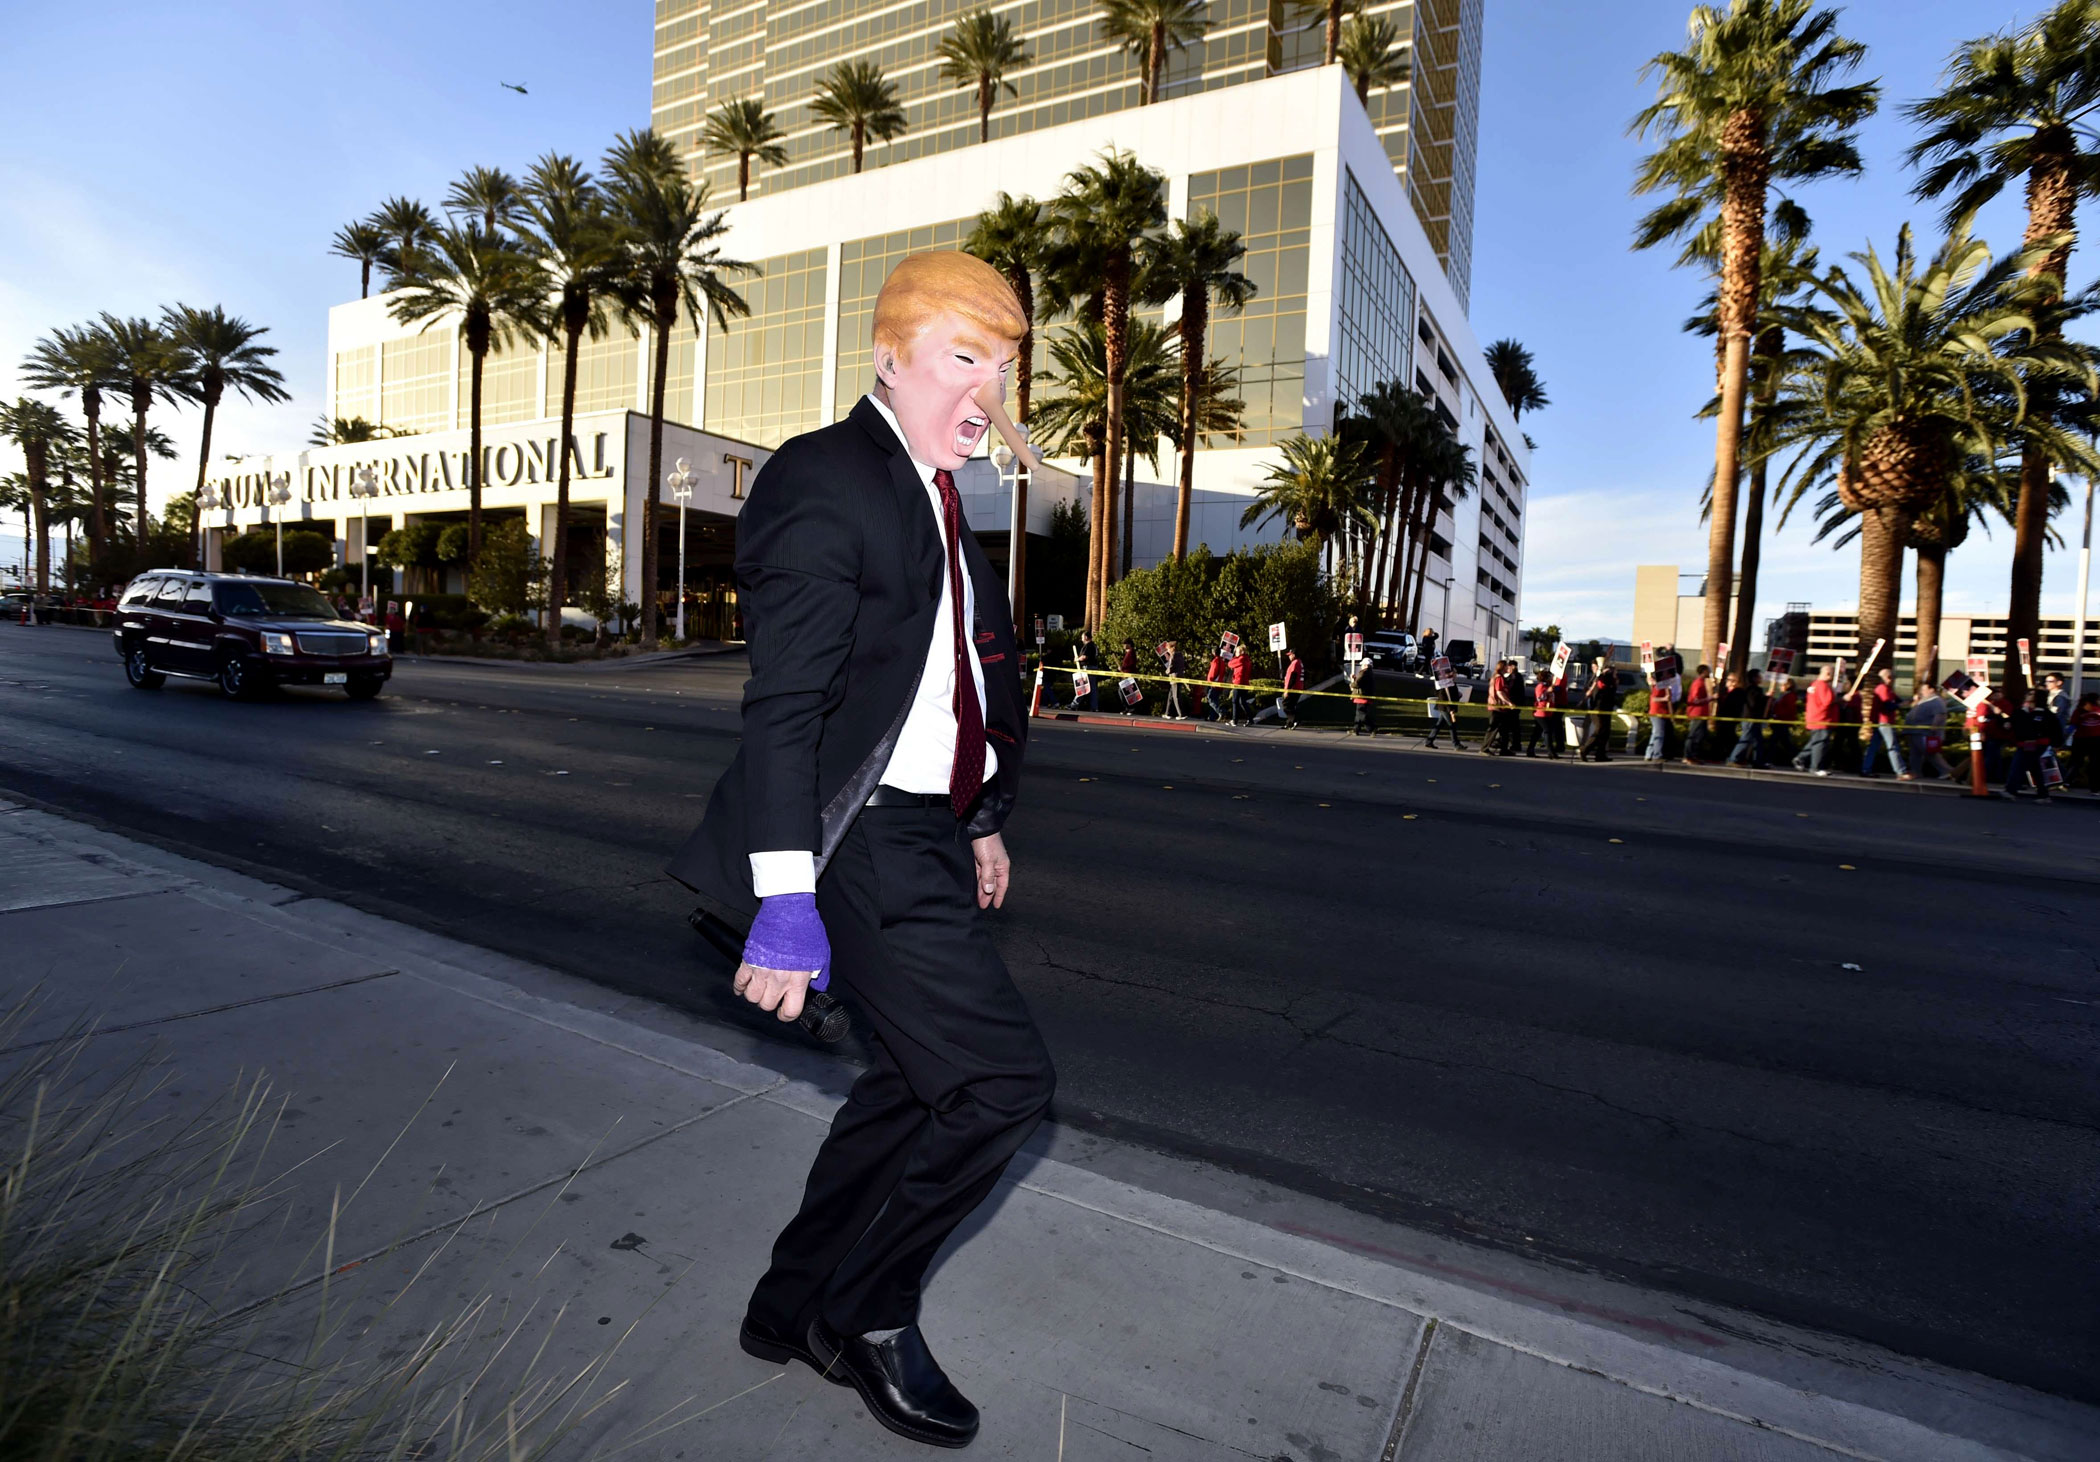 Gil Mobley wears a costume in the likeness of Donald Trump in front of the Trump Hotel in Las Vegas on Feb. 23, 2016.